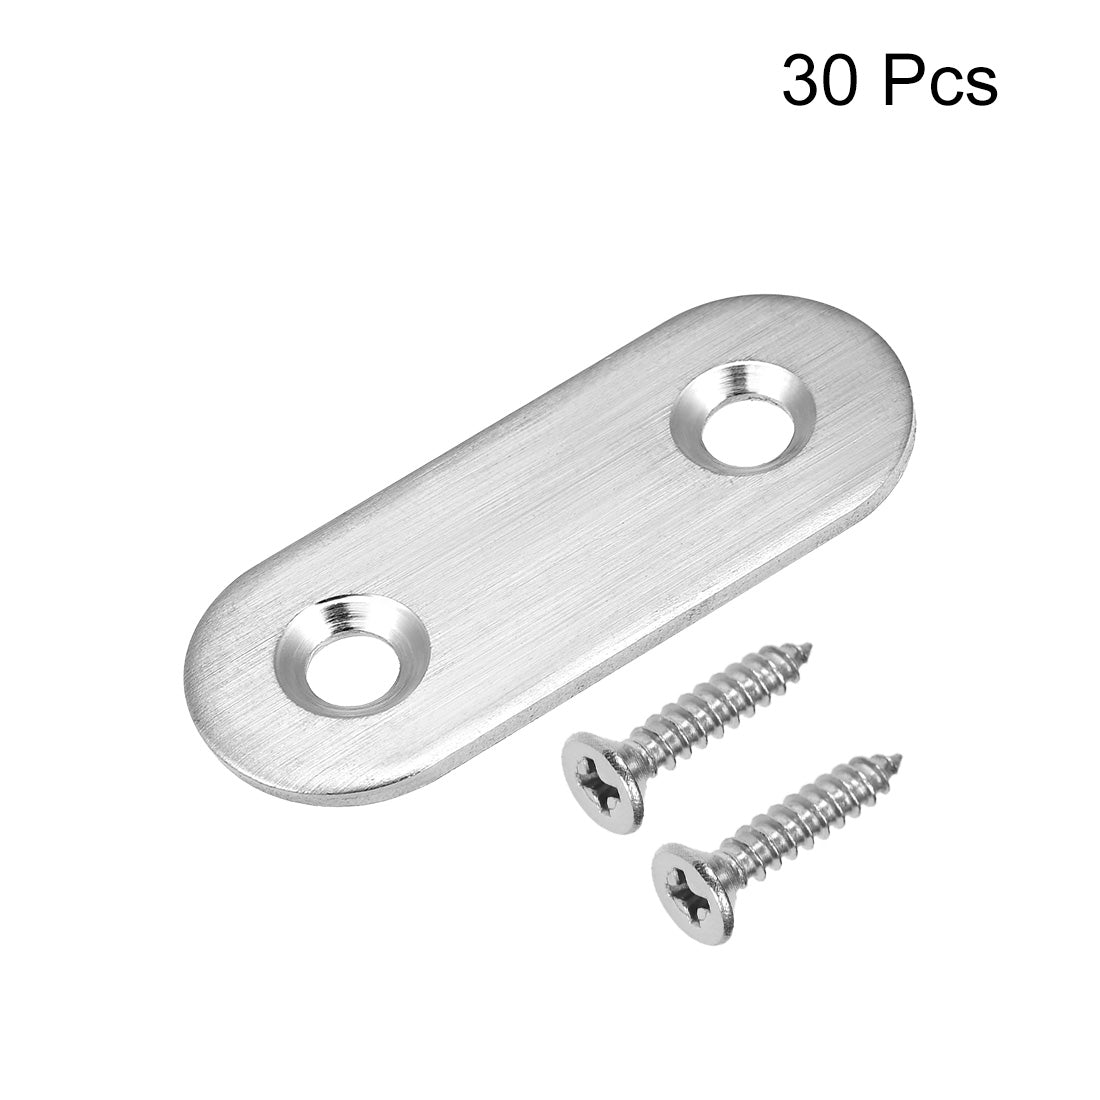 uxcell Uxcell Repair Plate, 40mm x 16mm, Flat Fixing Mending Bracket Connector with Screws, 30 Pcs